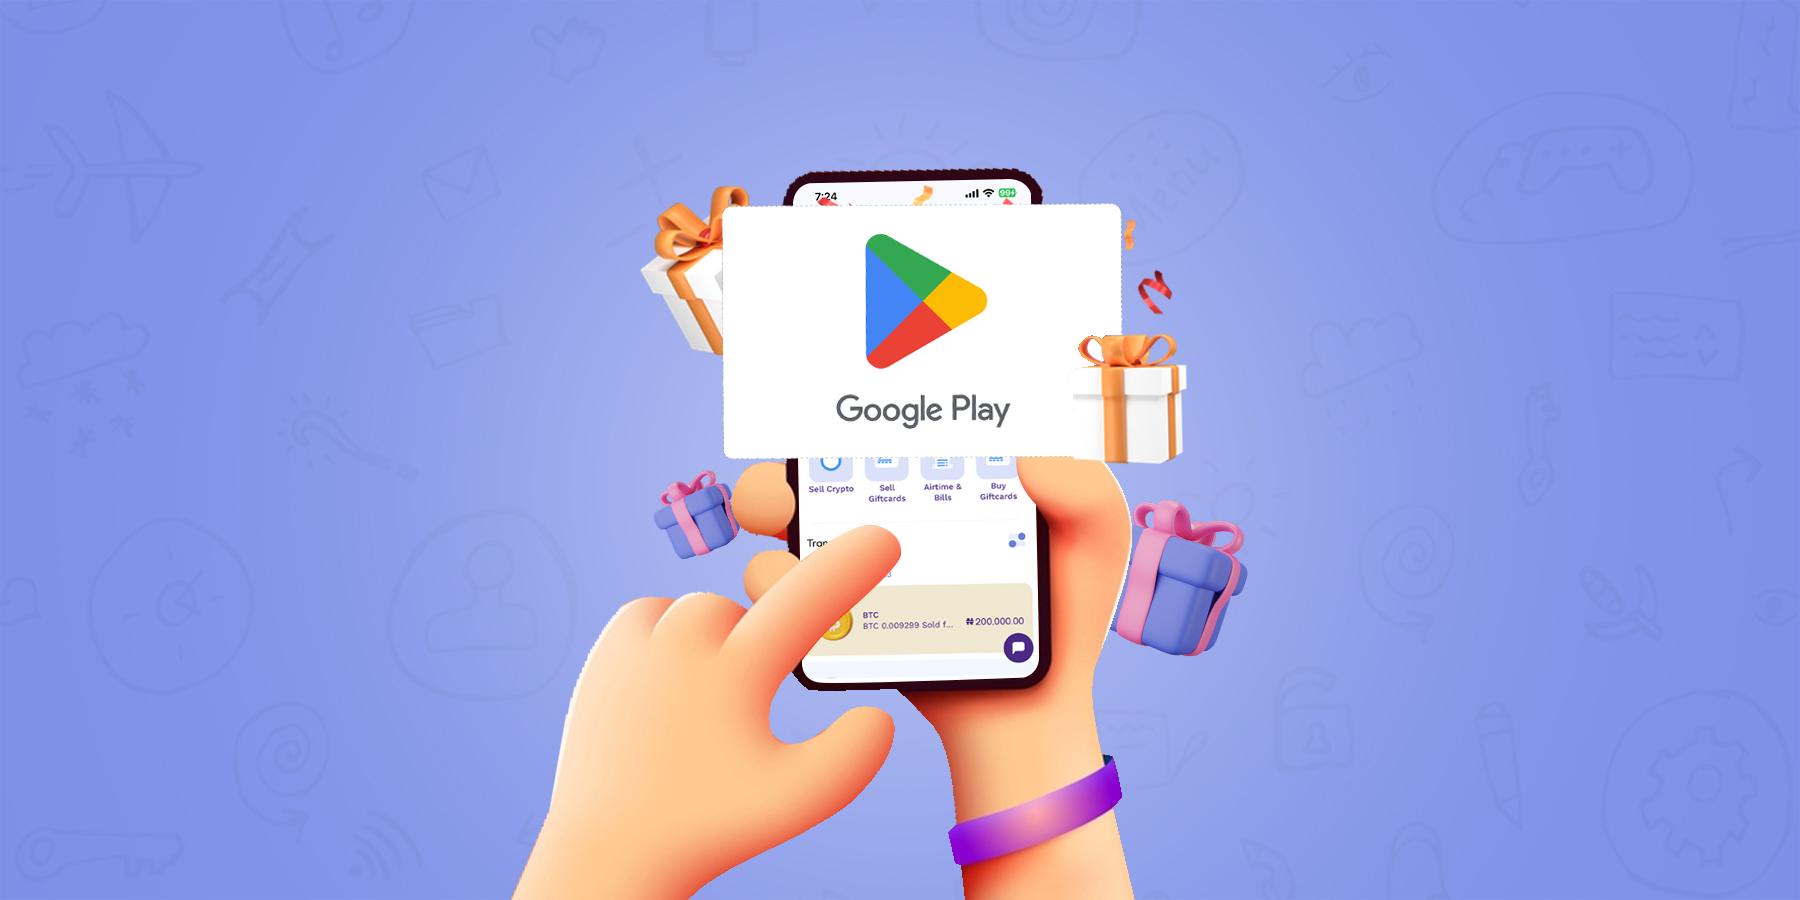 How Much Is $100 Google Play Gift Card In Nigerian Naira - Prestmit